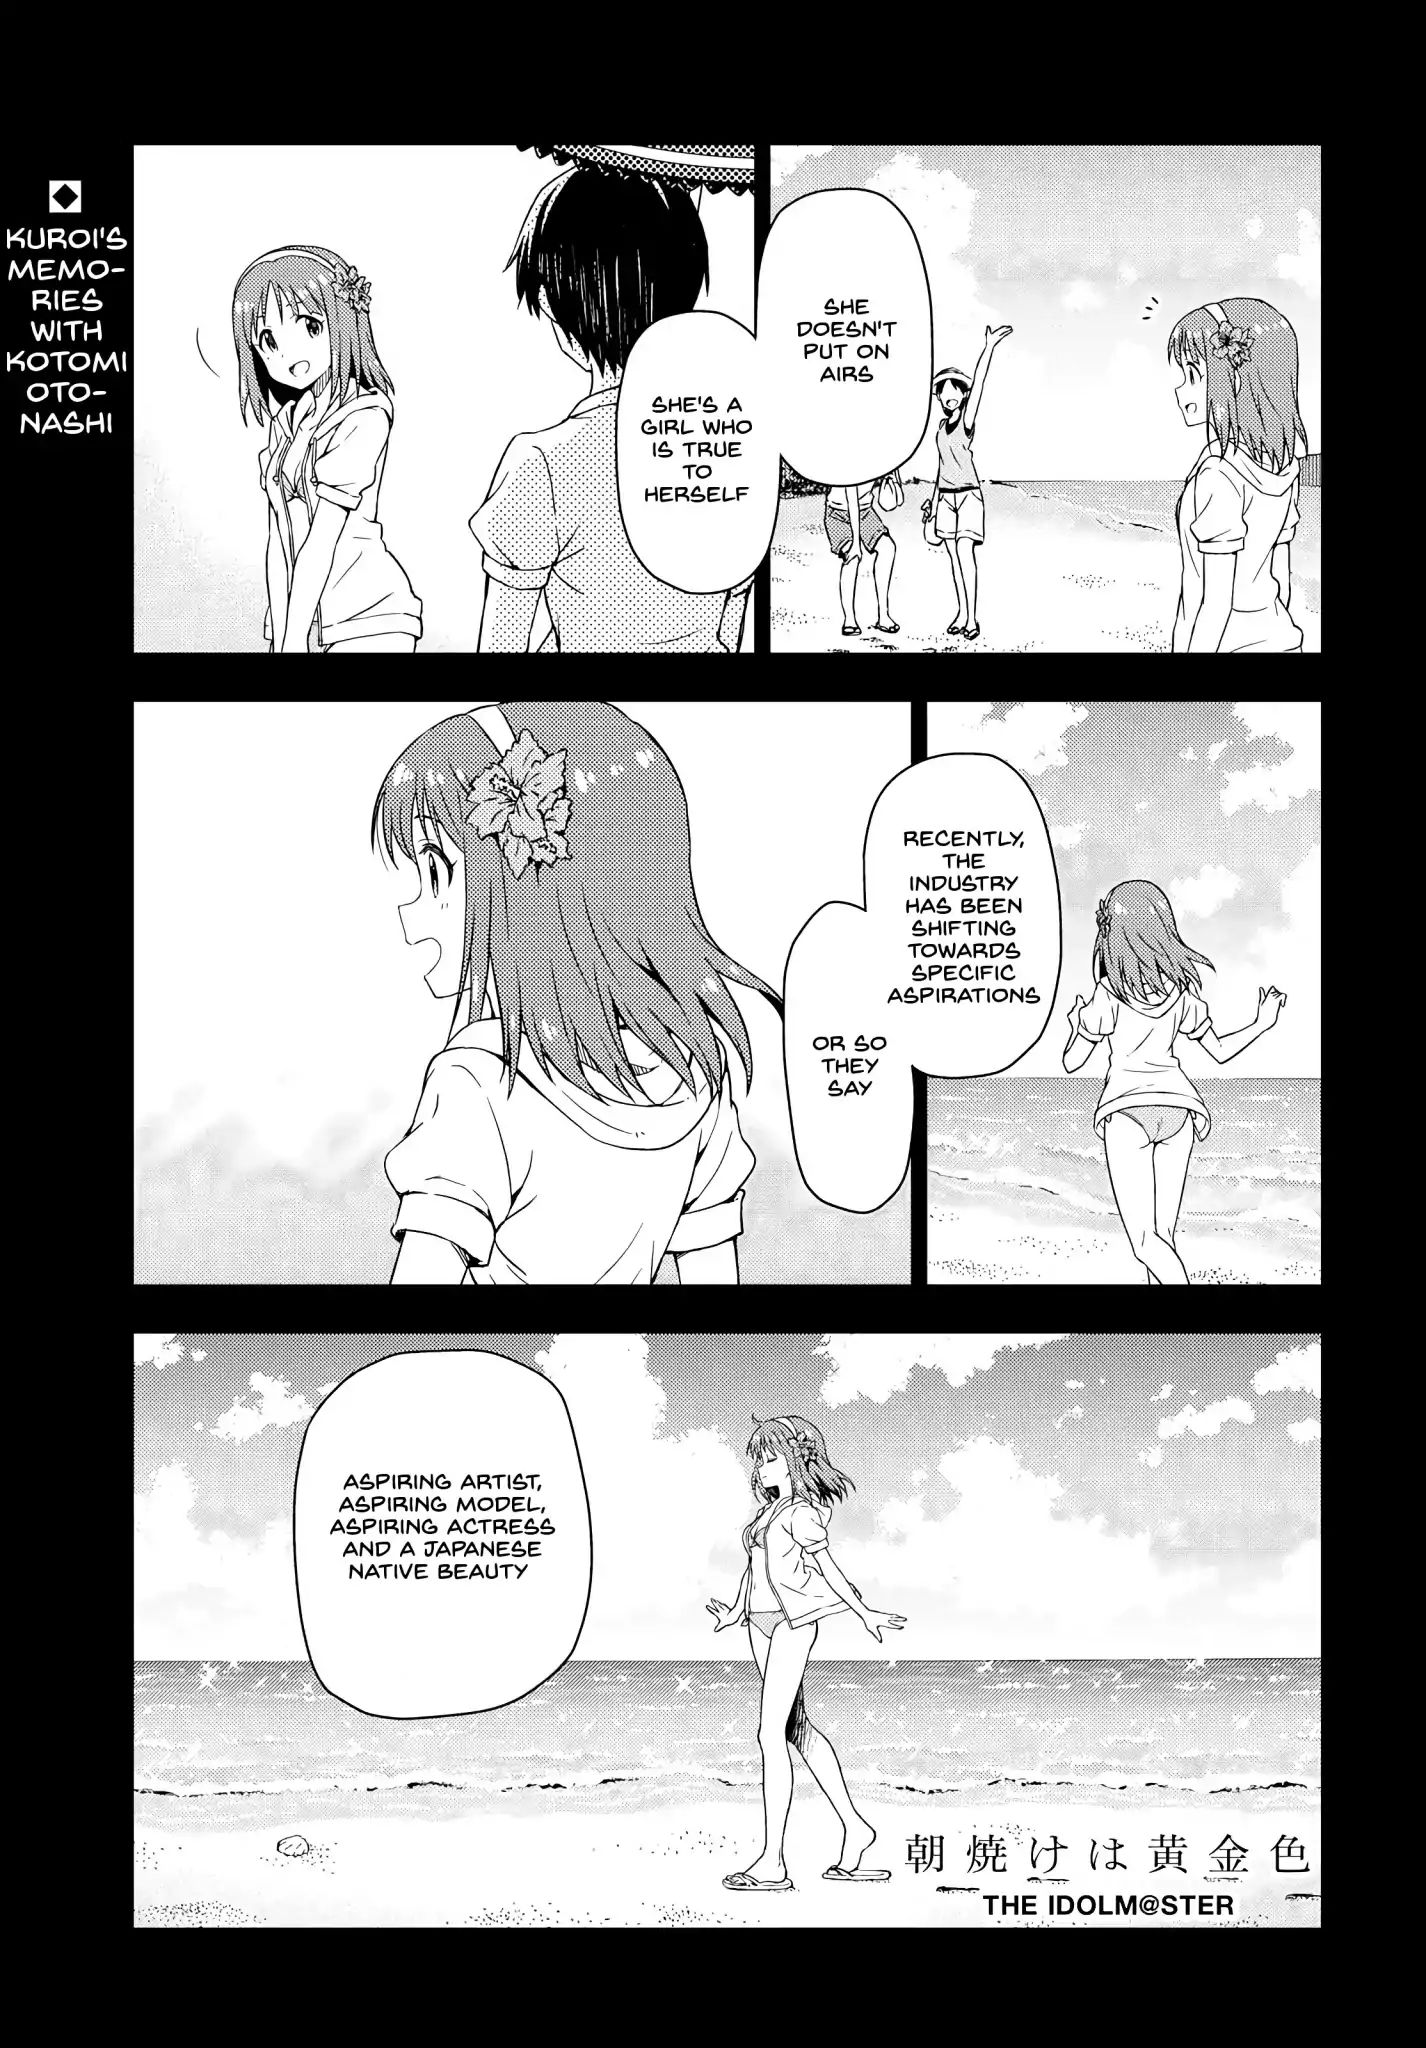 The Idolm@ster: Asayake Wa Koganeiro Vol.1 Chapter 10: Under The Spell That Kotomi Otonashi Cast - Picture 2